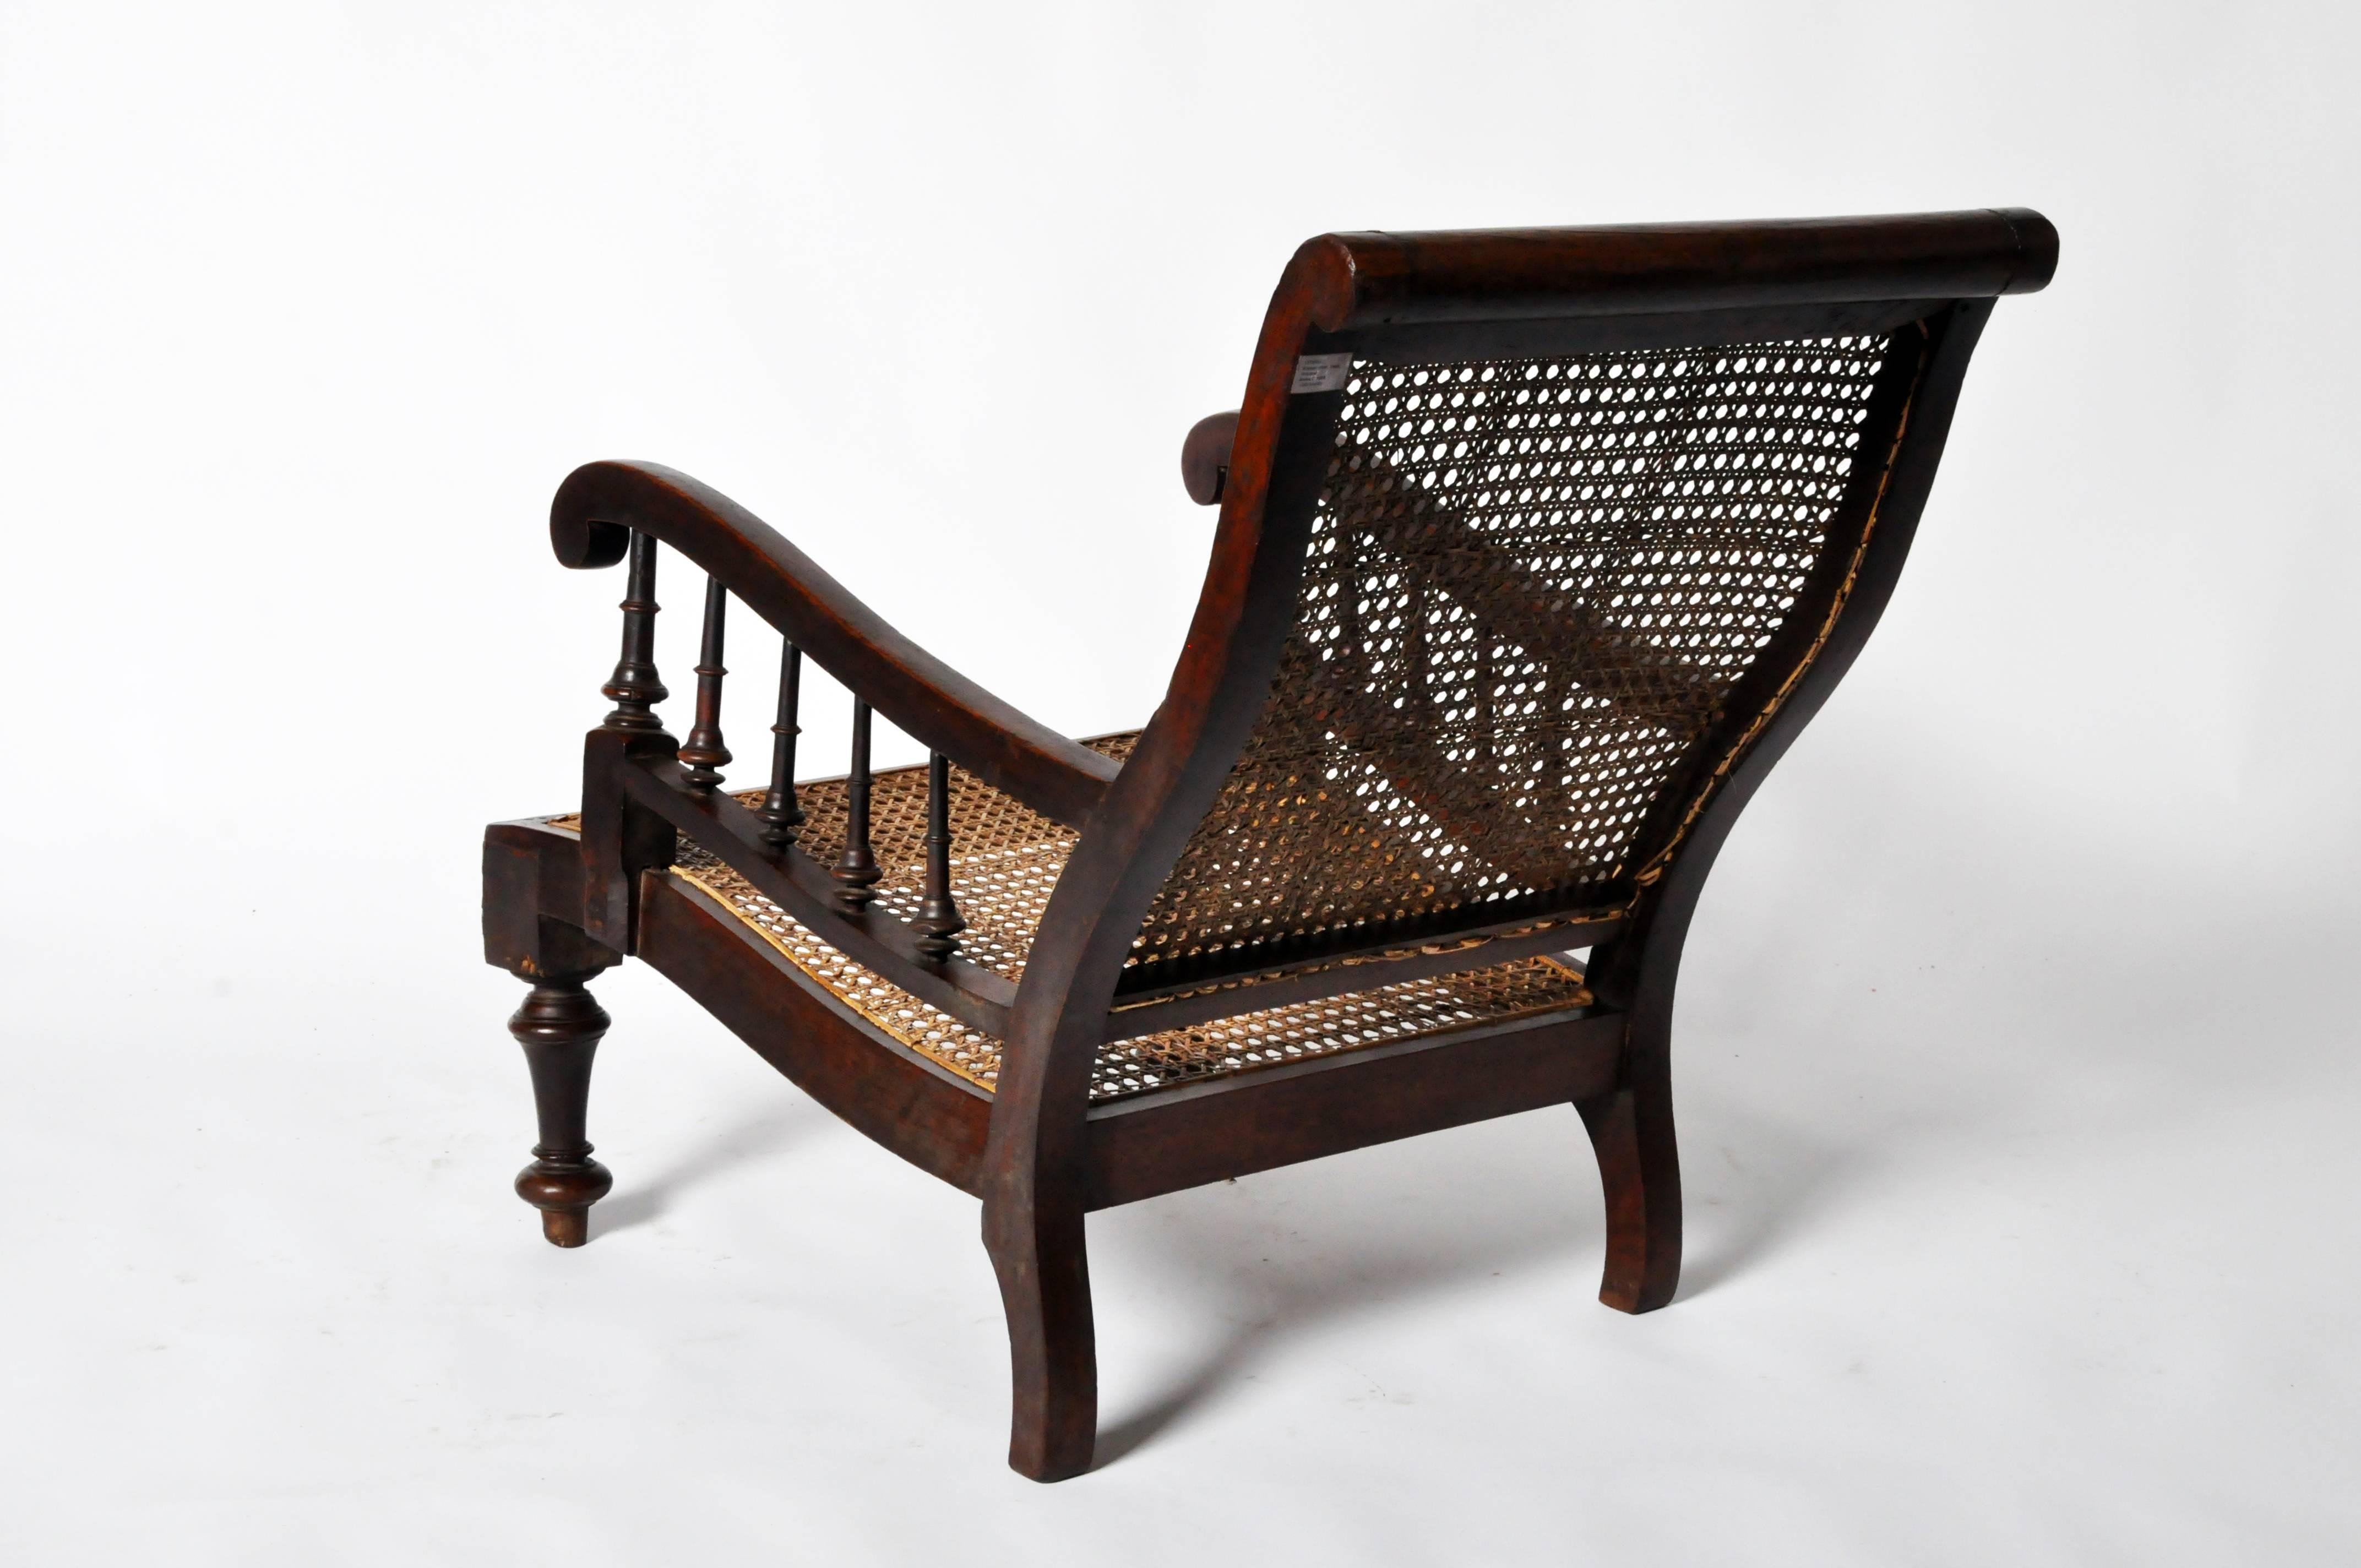 20th Century British Colonial Planter’s Chair